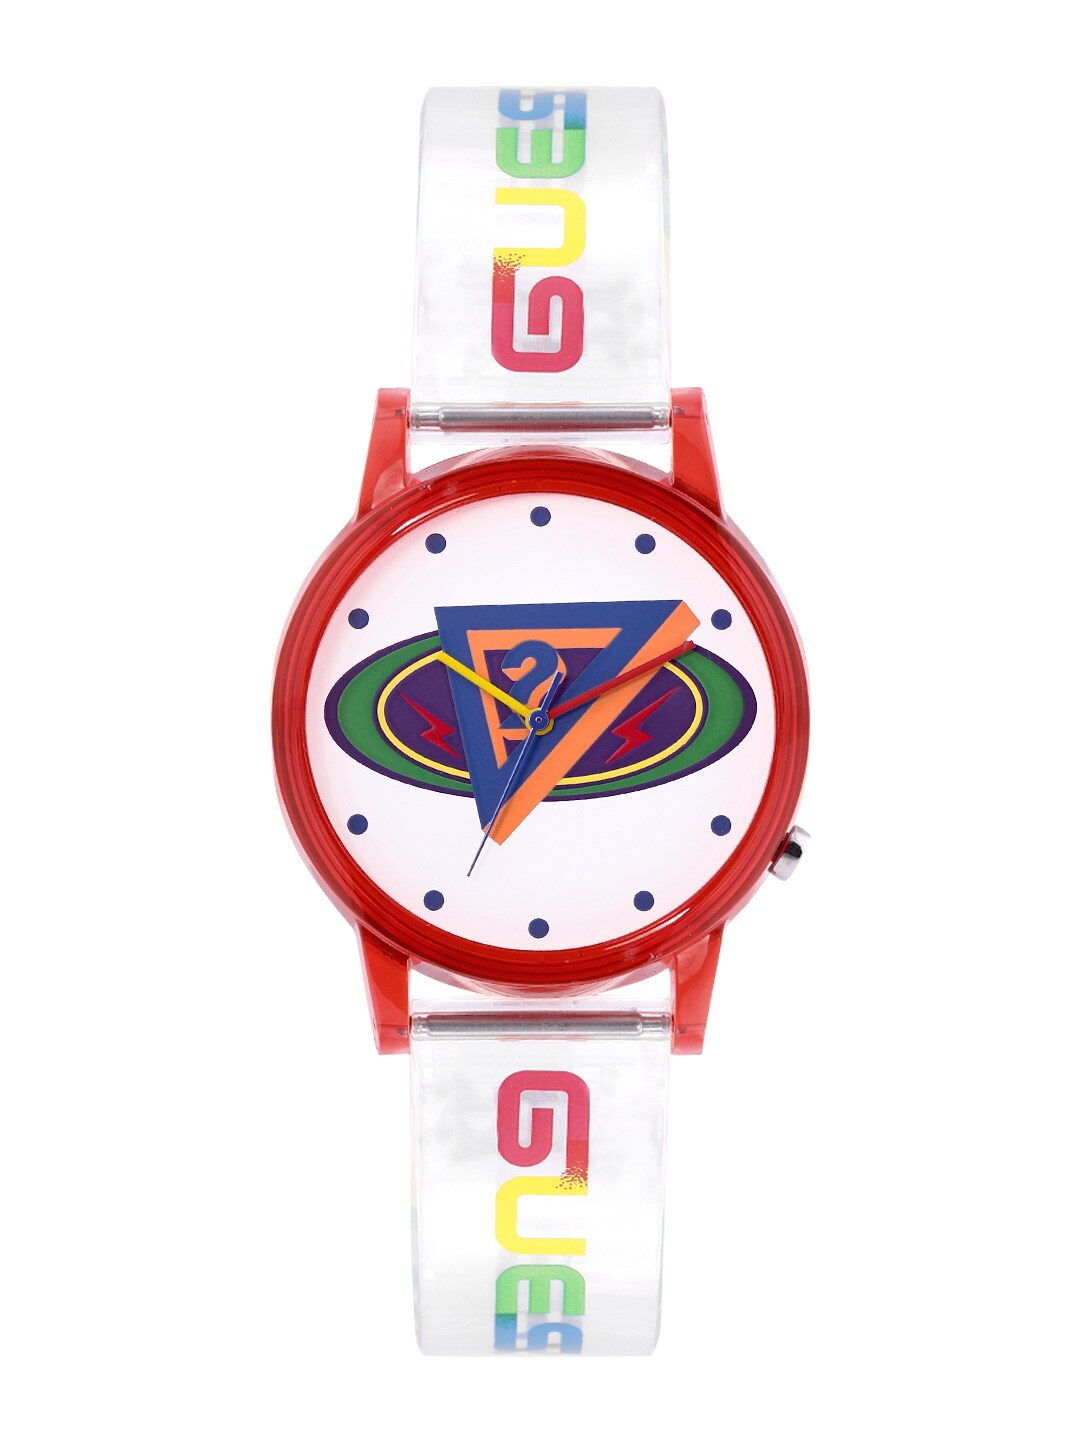 GUESS Unisex White & Red Printed Dial & Transparent Straps Analogue Watch V1050M1 Price in India